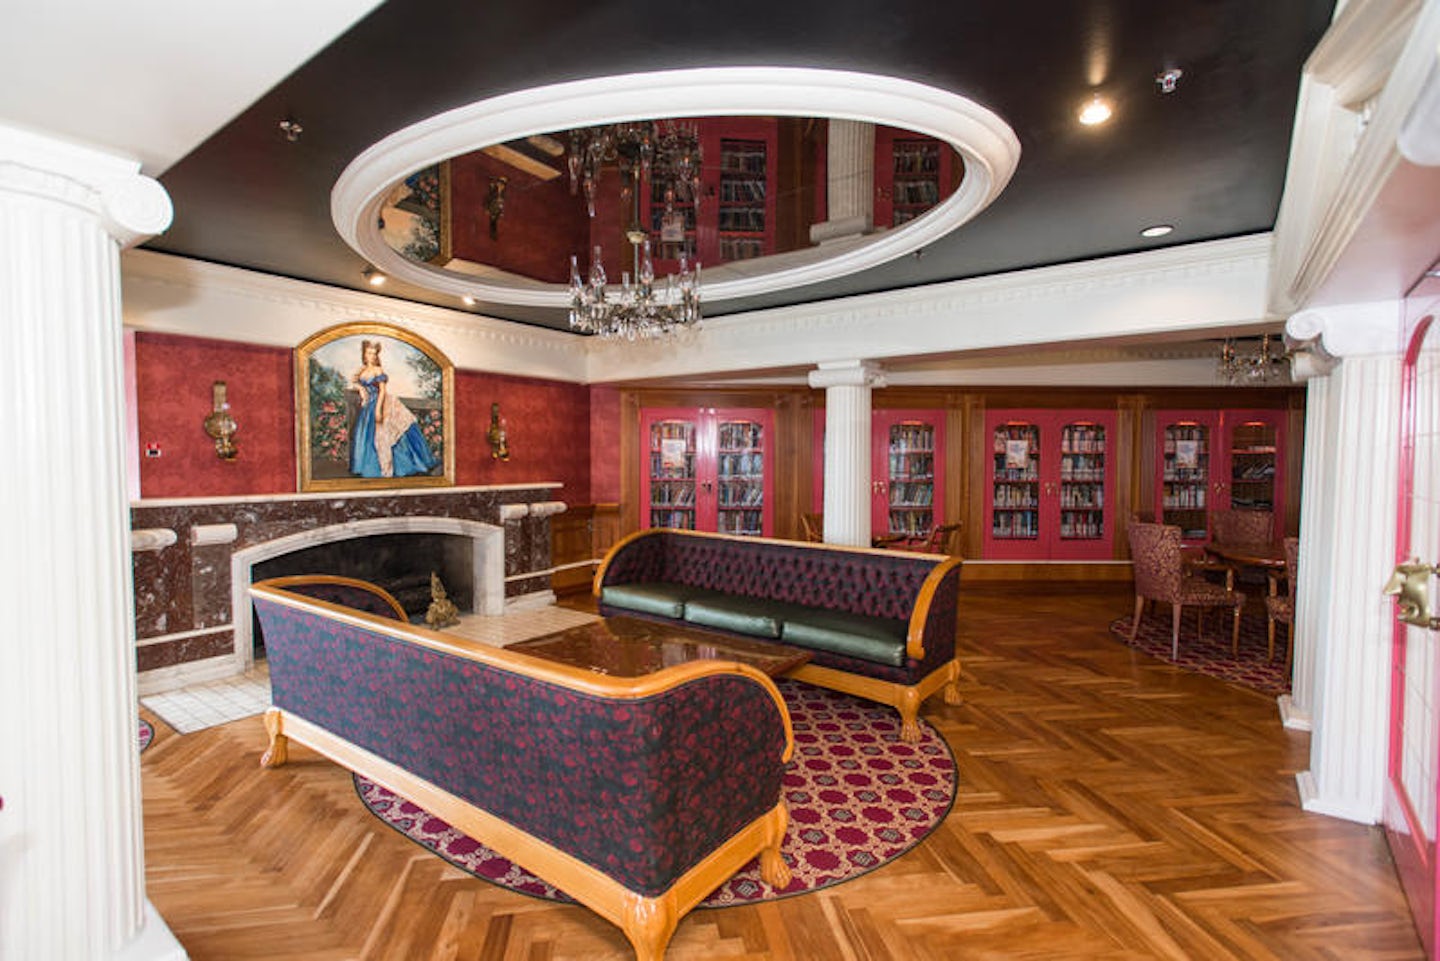 The Tara Library on Carnival Fascination